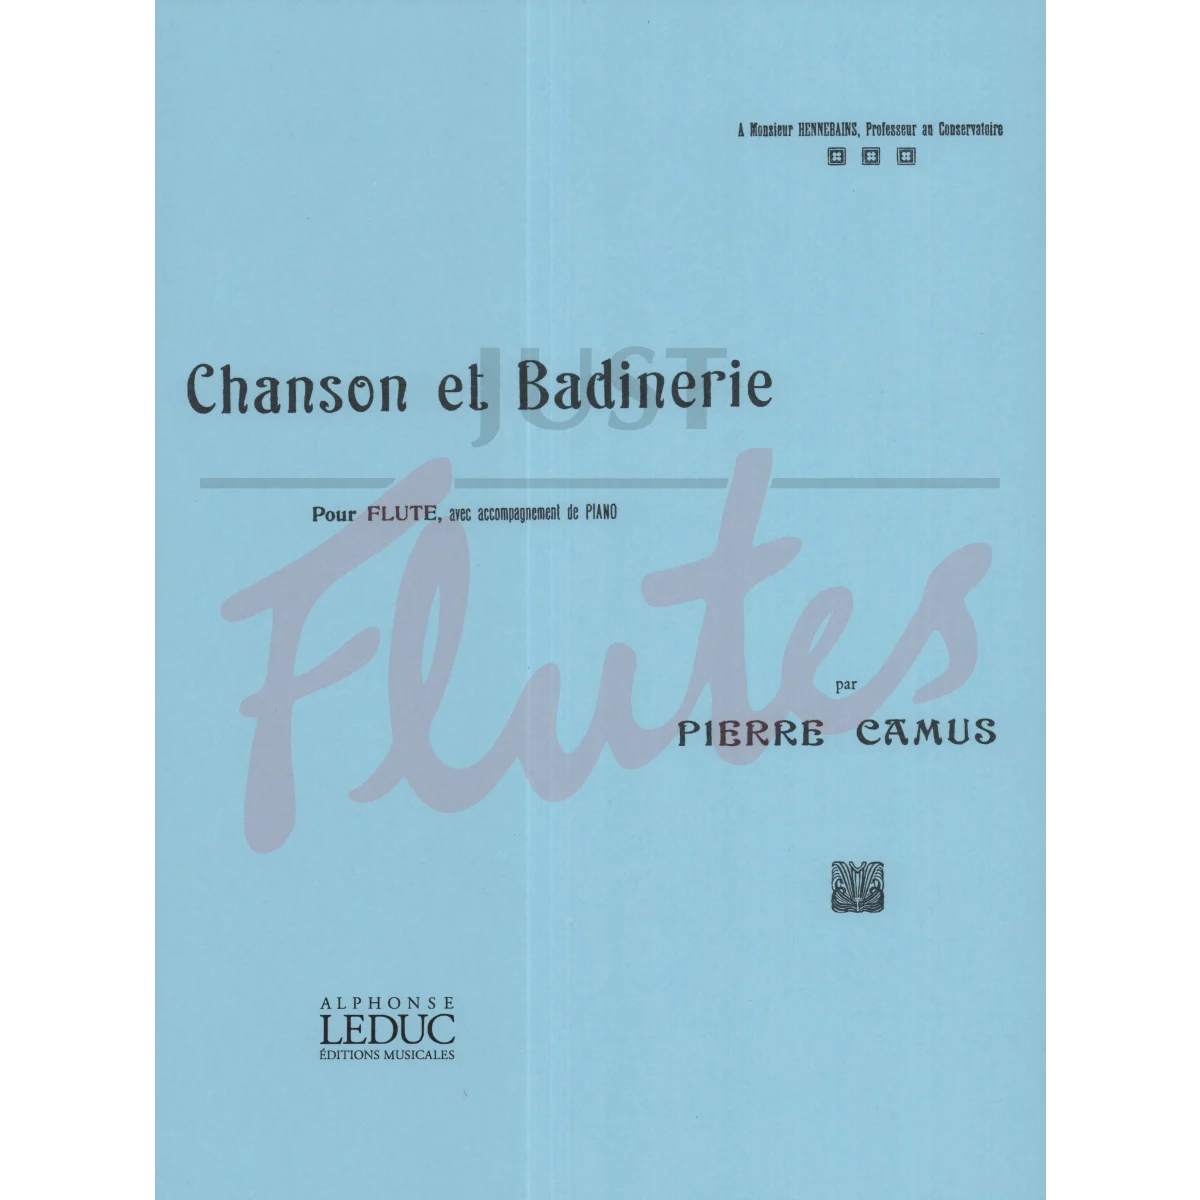 Chanson et Badinerie for Flute and Piano